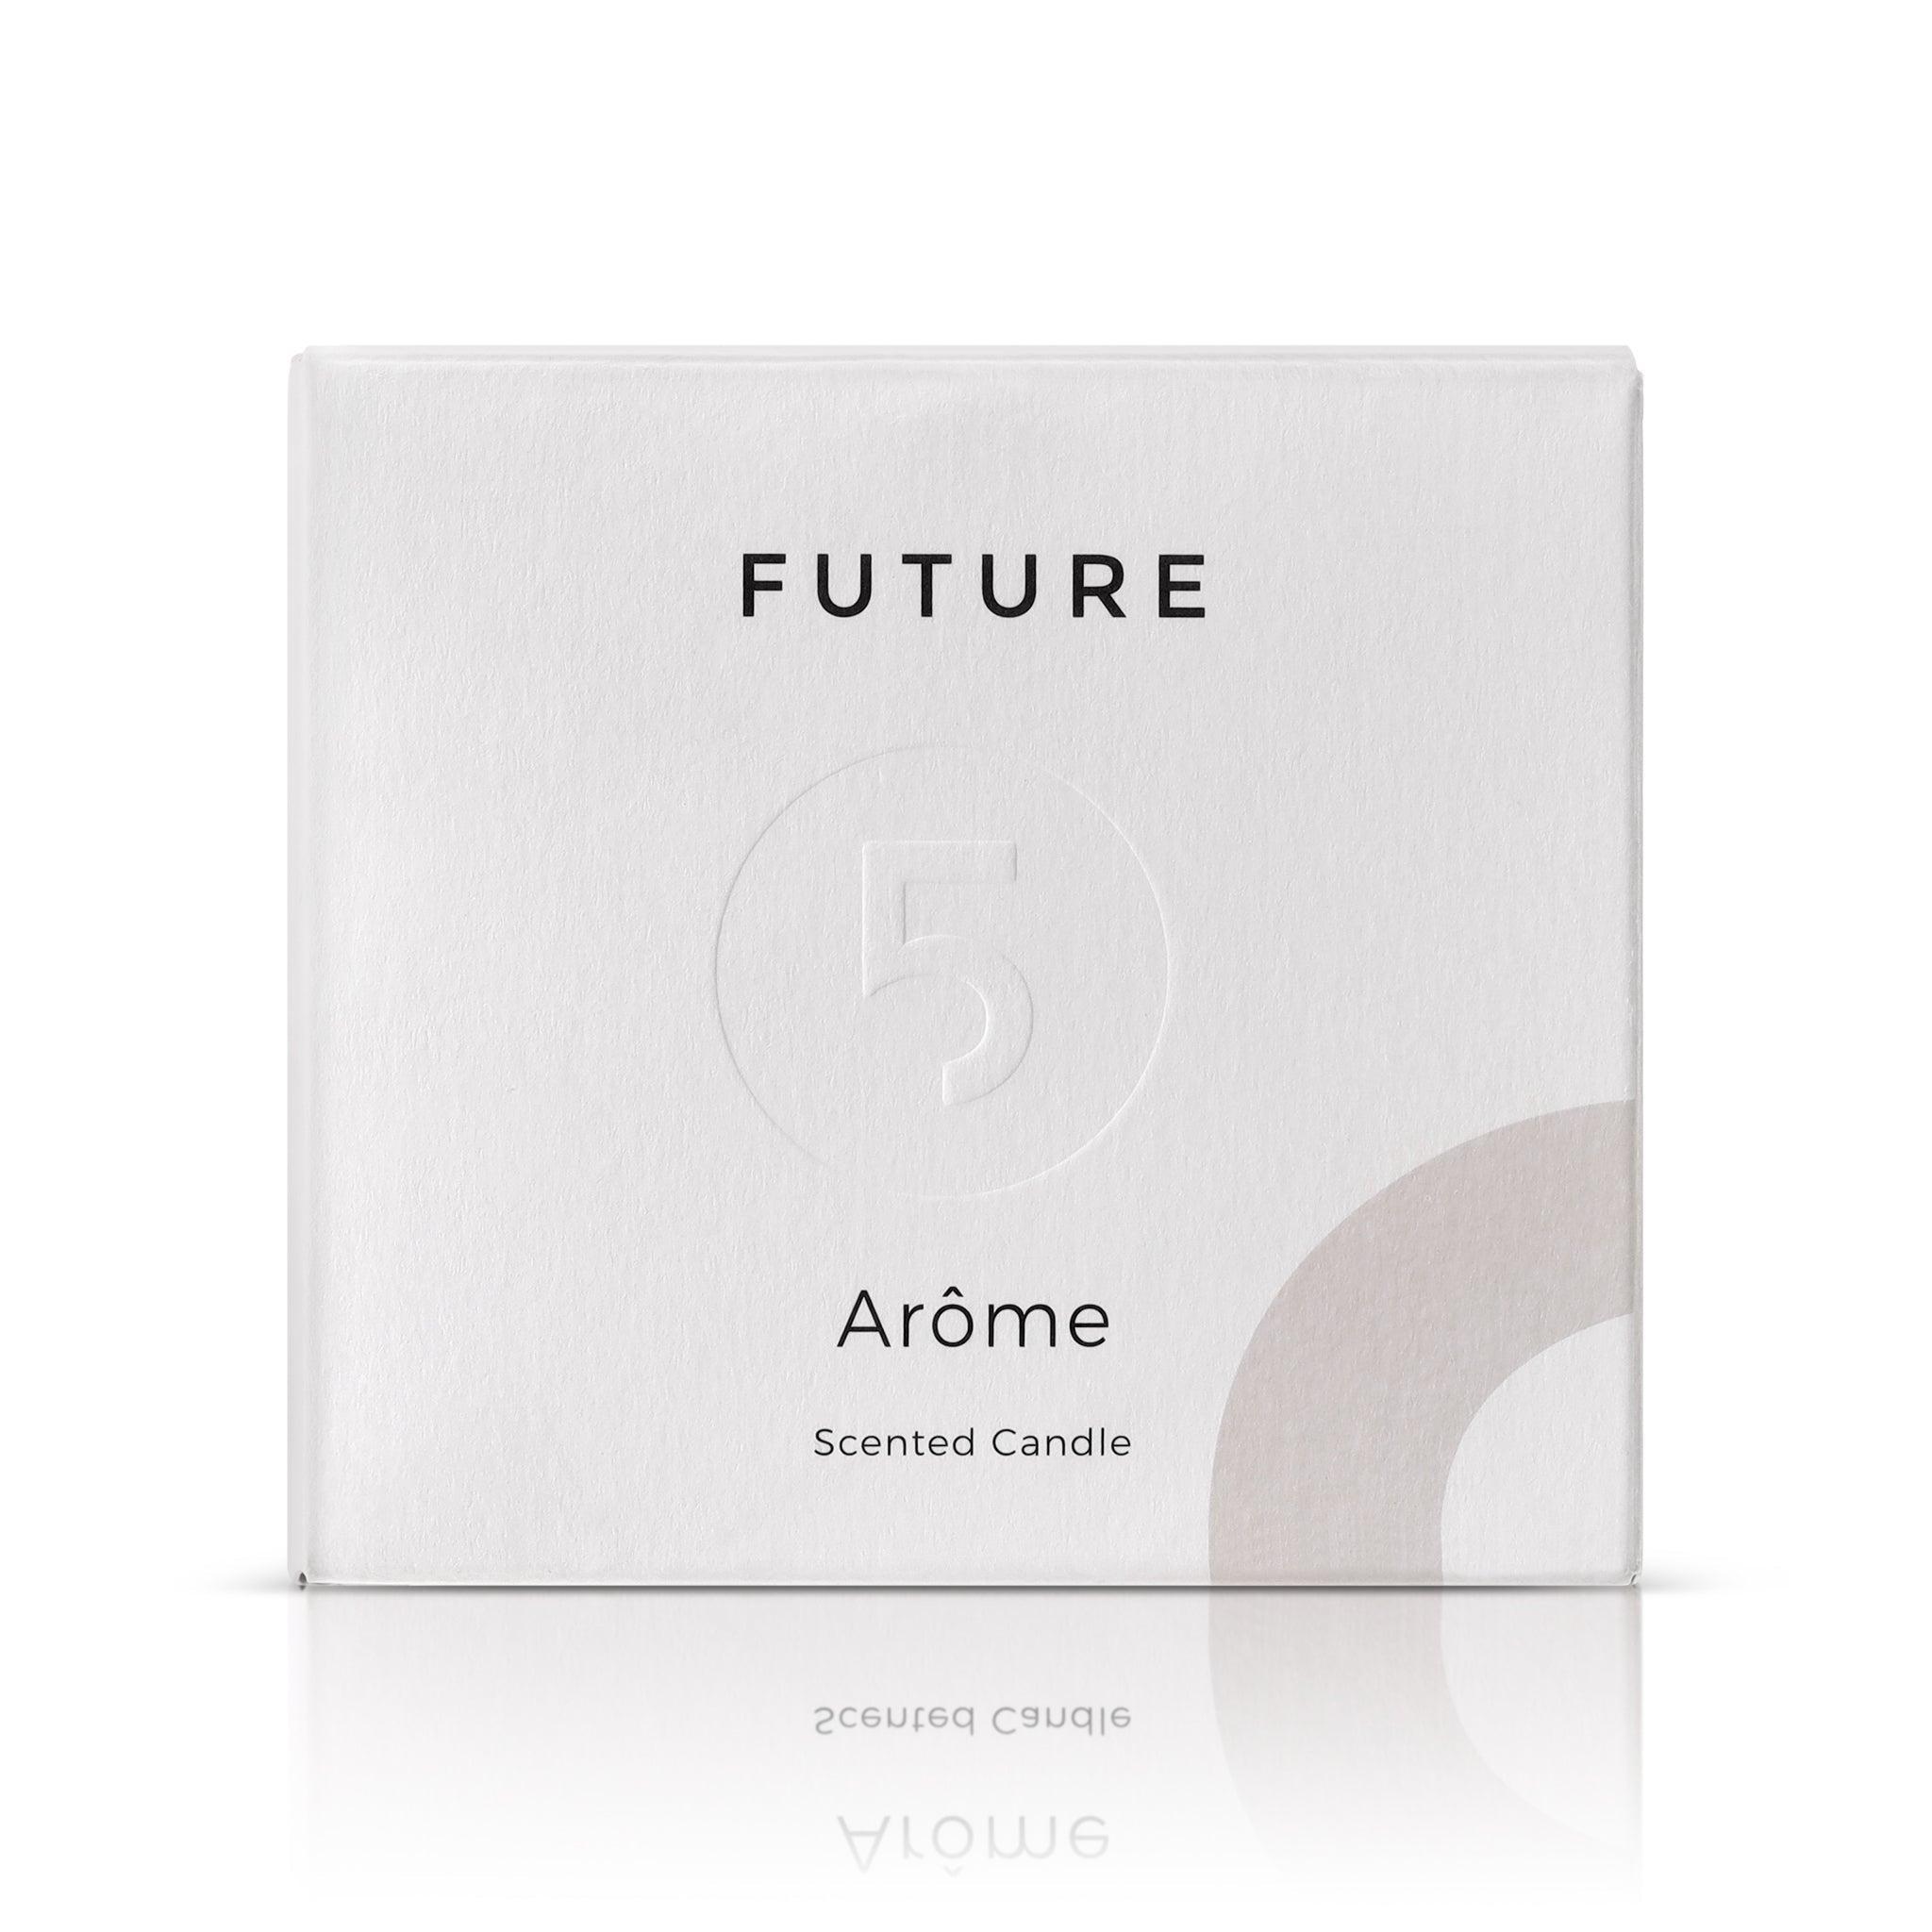 Arôme Candle - Future Cosmetics The 5 Elements